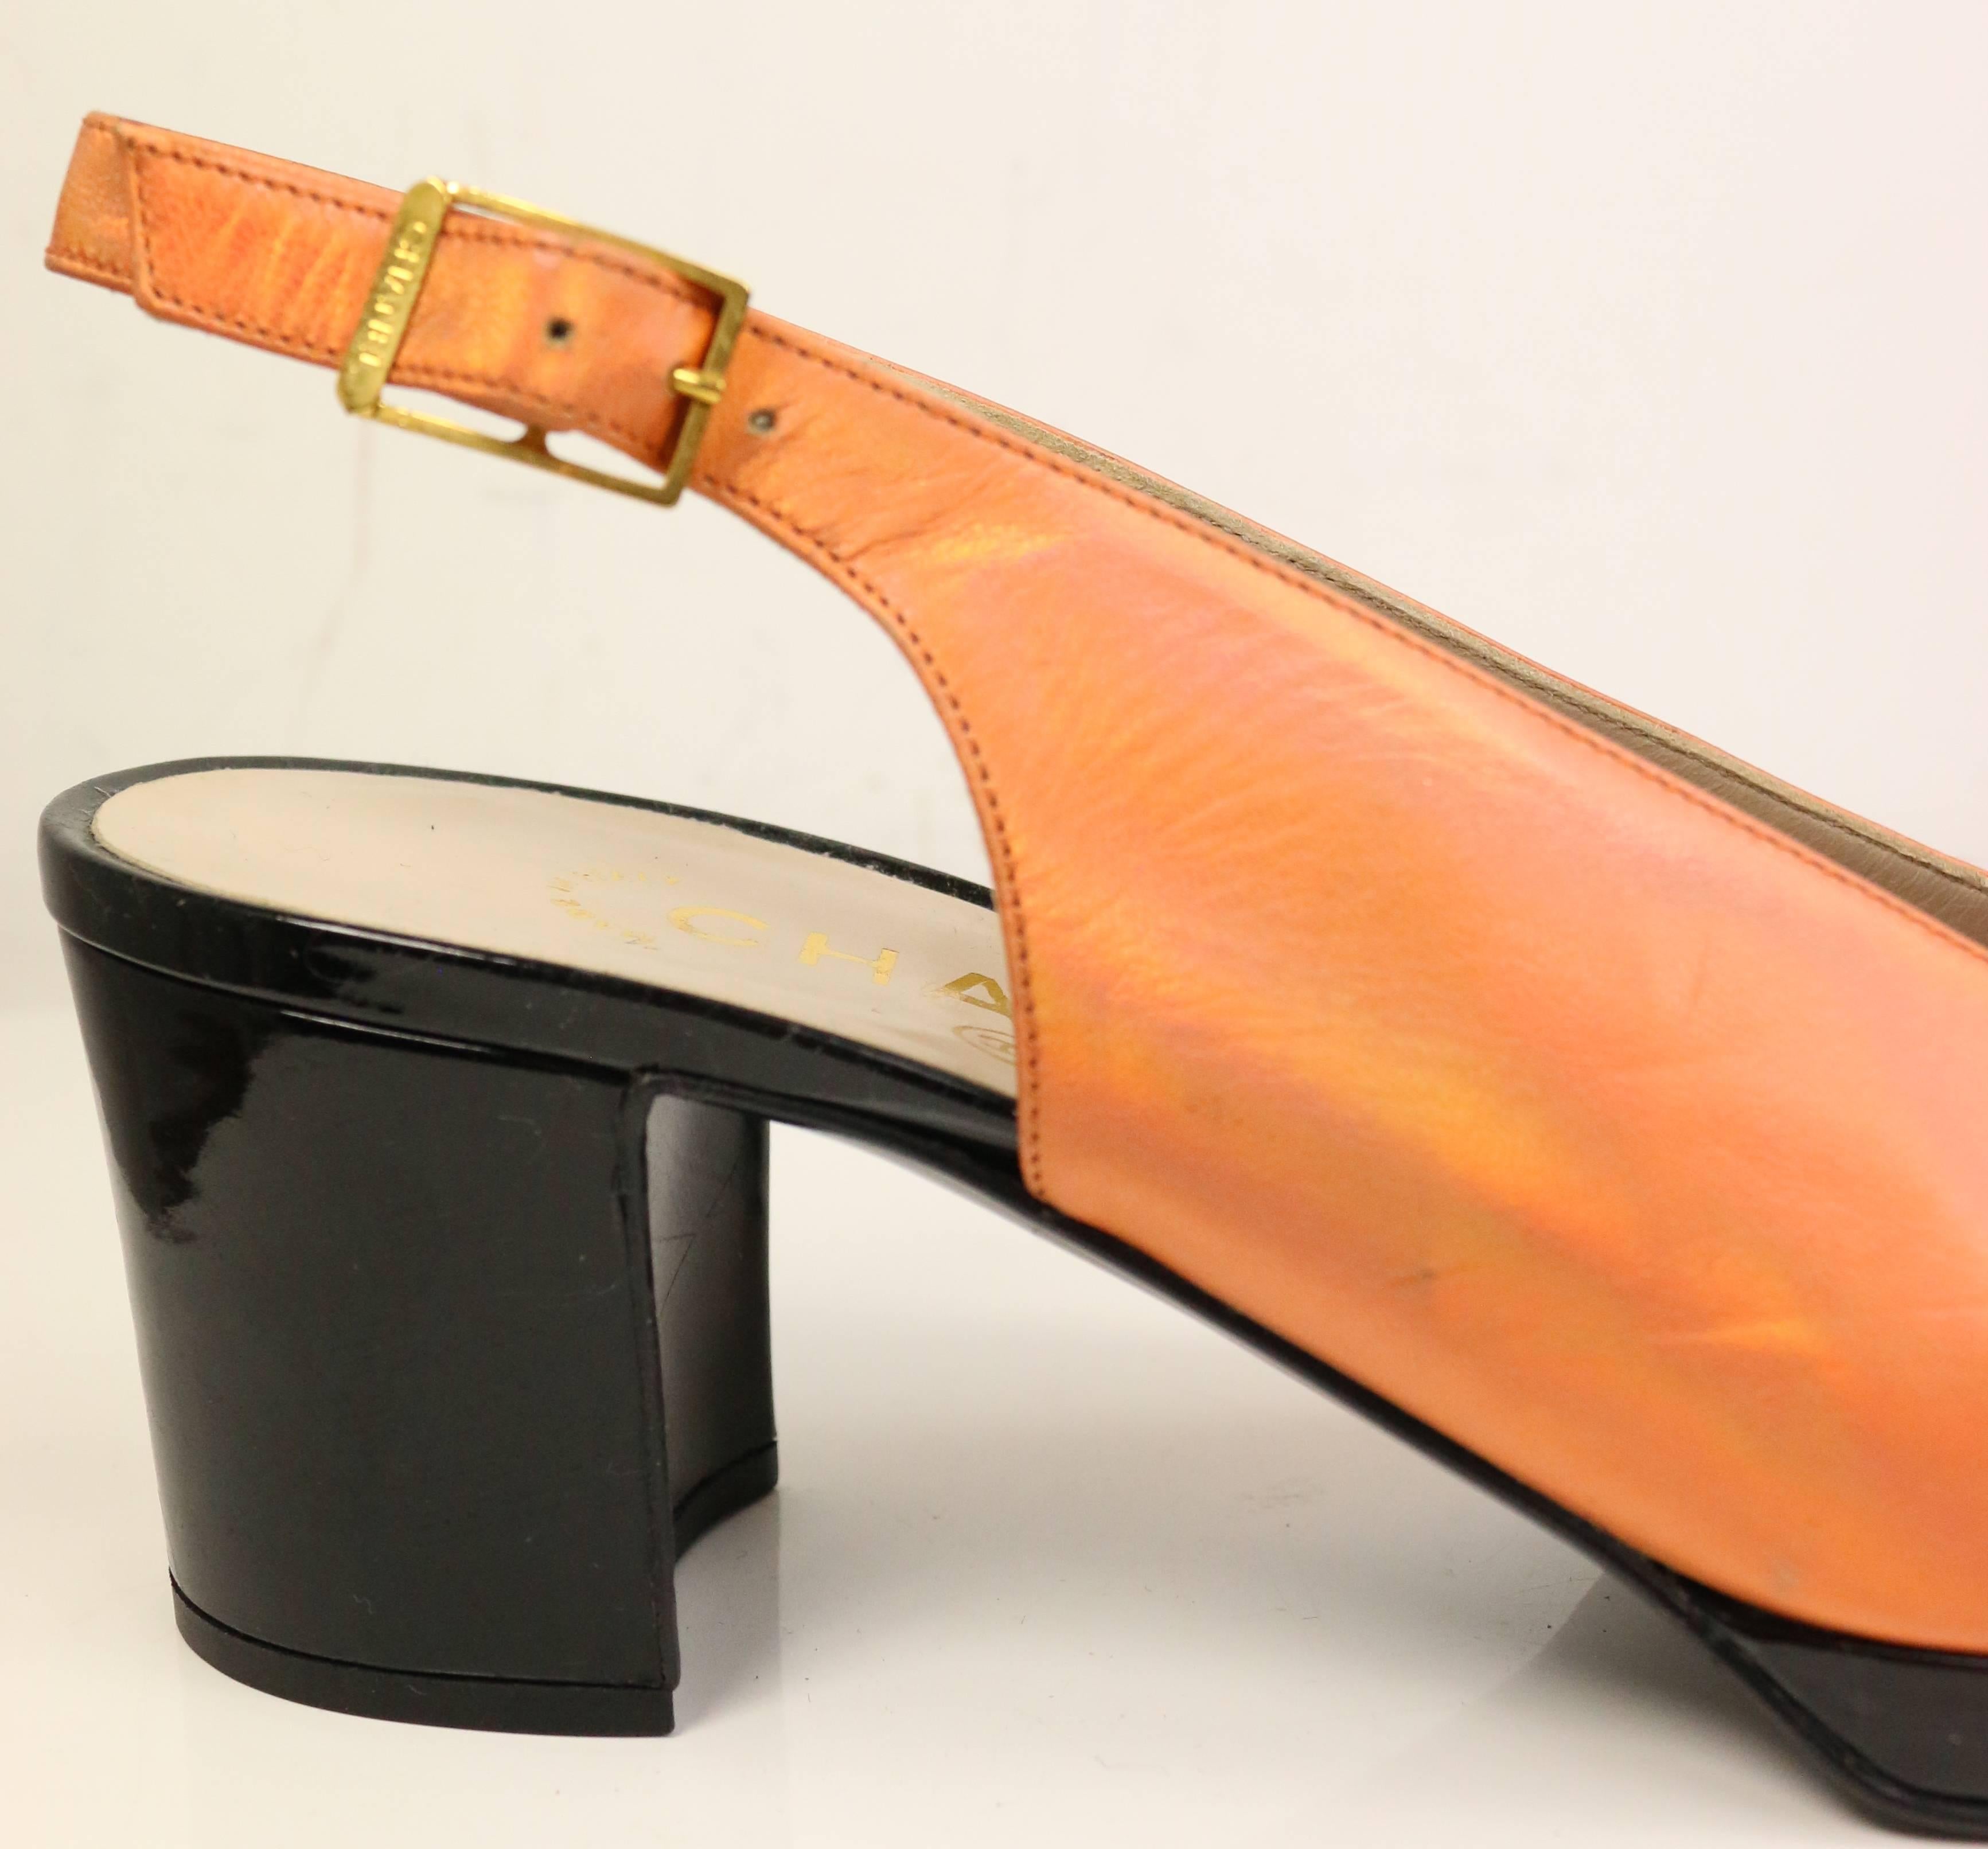 - Vintage 90s Chanel bi tone metallic orange with black patent leather square toe Mary Jane slingback shoes. This is a classic Coco Chanel style, elegant and chic summer shoes. 

- Size 37.5. 

- Made in Italy.

- Comes with dust bag. 

- Condition: